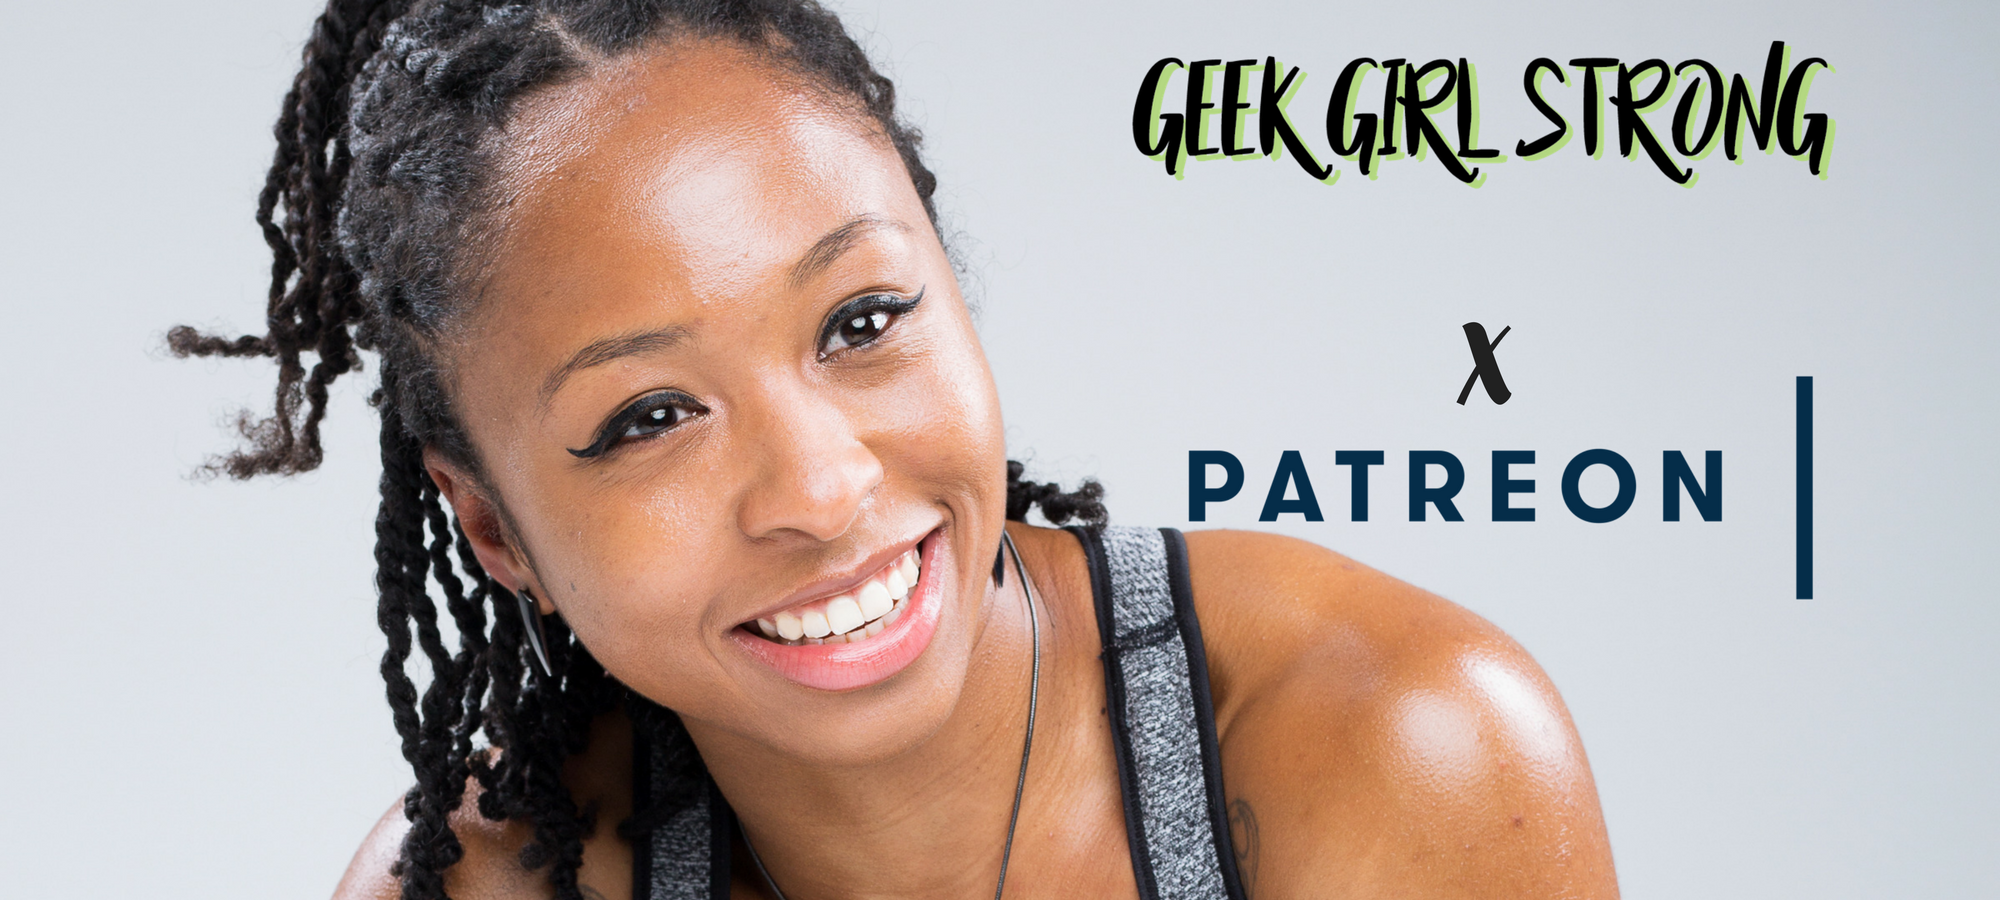 Monday Motivation | Geek Girl Strong on Patreon!